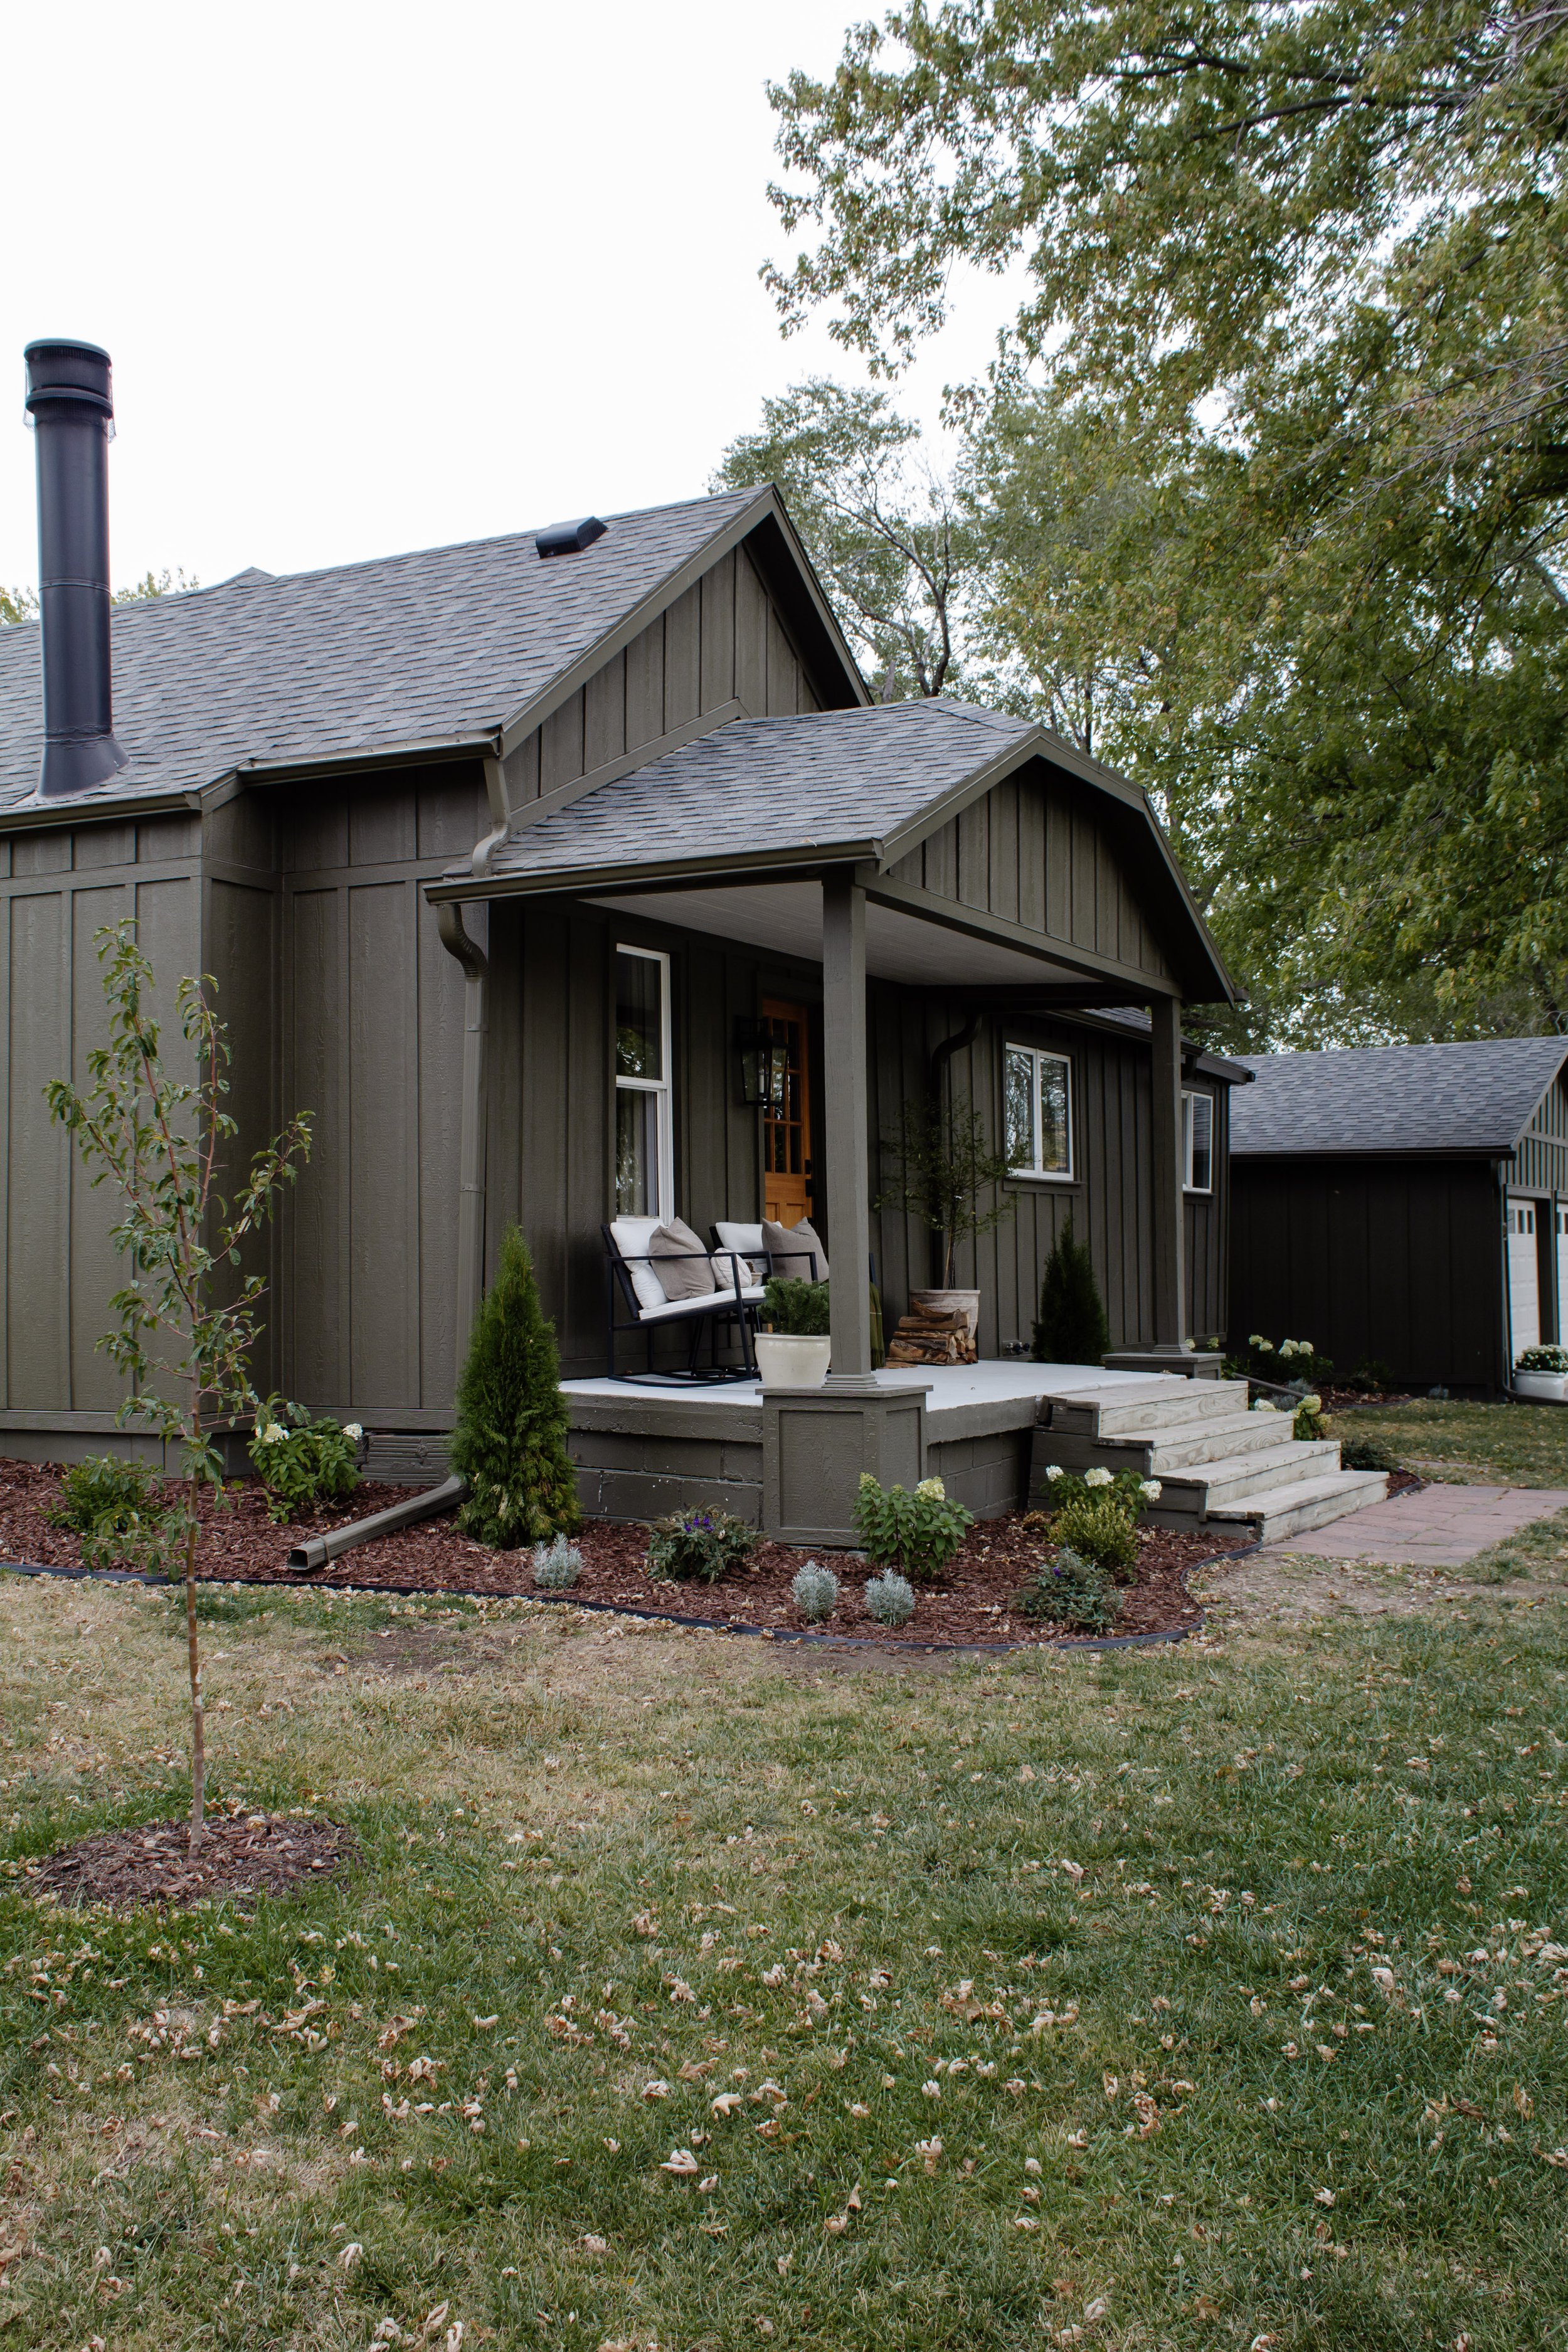 Our Landscaping Reveal - Nadine Stay | Our front elevation landscape plans. The plants we chose. Hydrangeas, lavender, boxwood, & pugster blue bush. Mulch & landscape edging we love. Cabin inspired exterior. Muddled Basil by Sherwin Williams